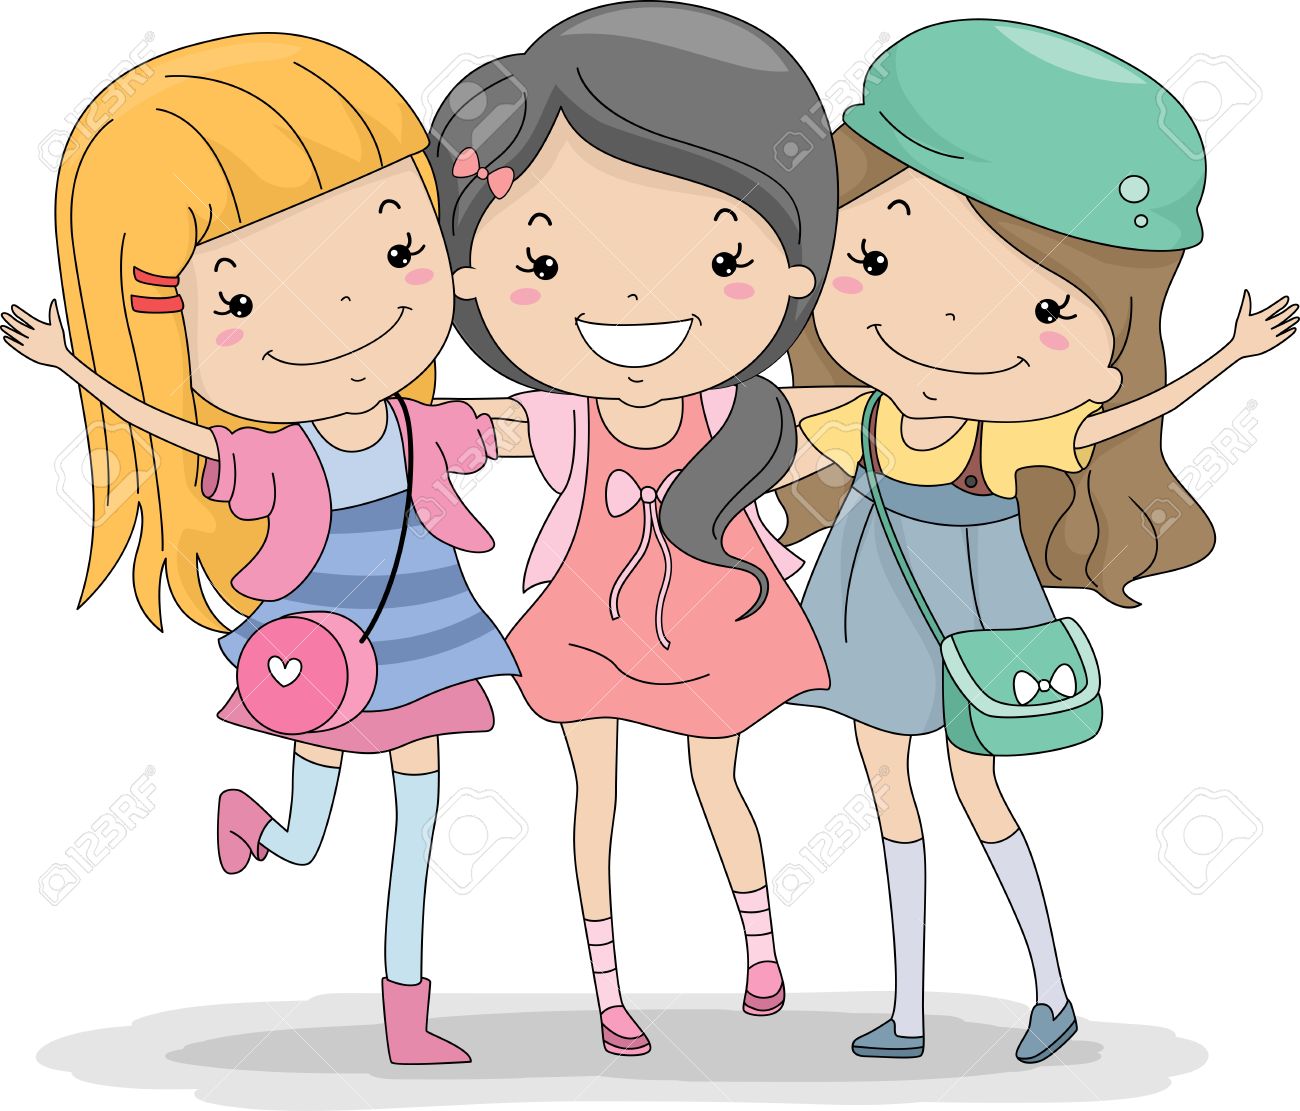 Free Cartoon Friendship Images Download Free Cartoon Friendship Images